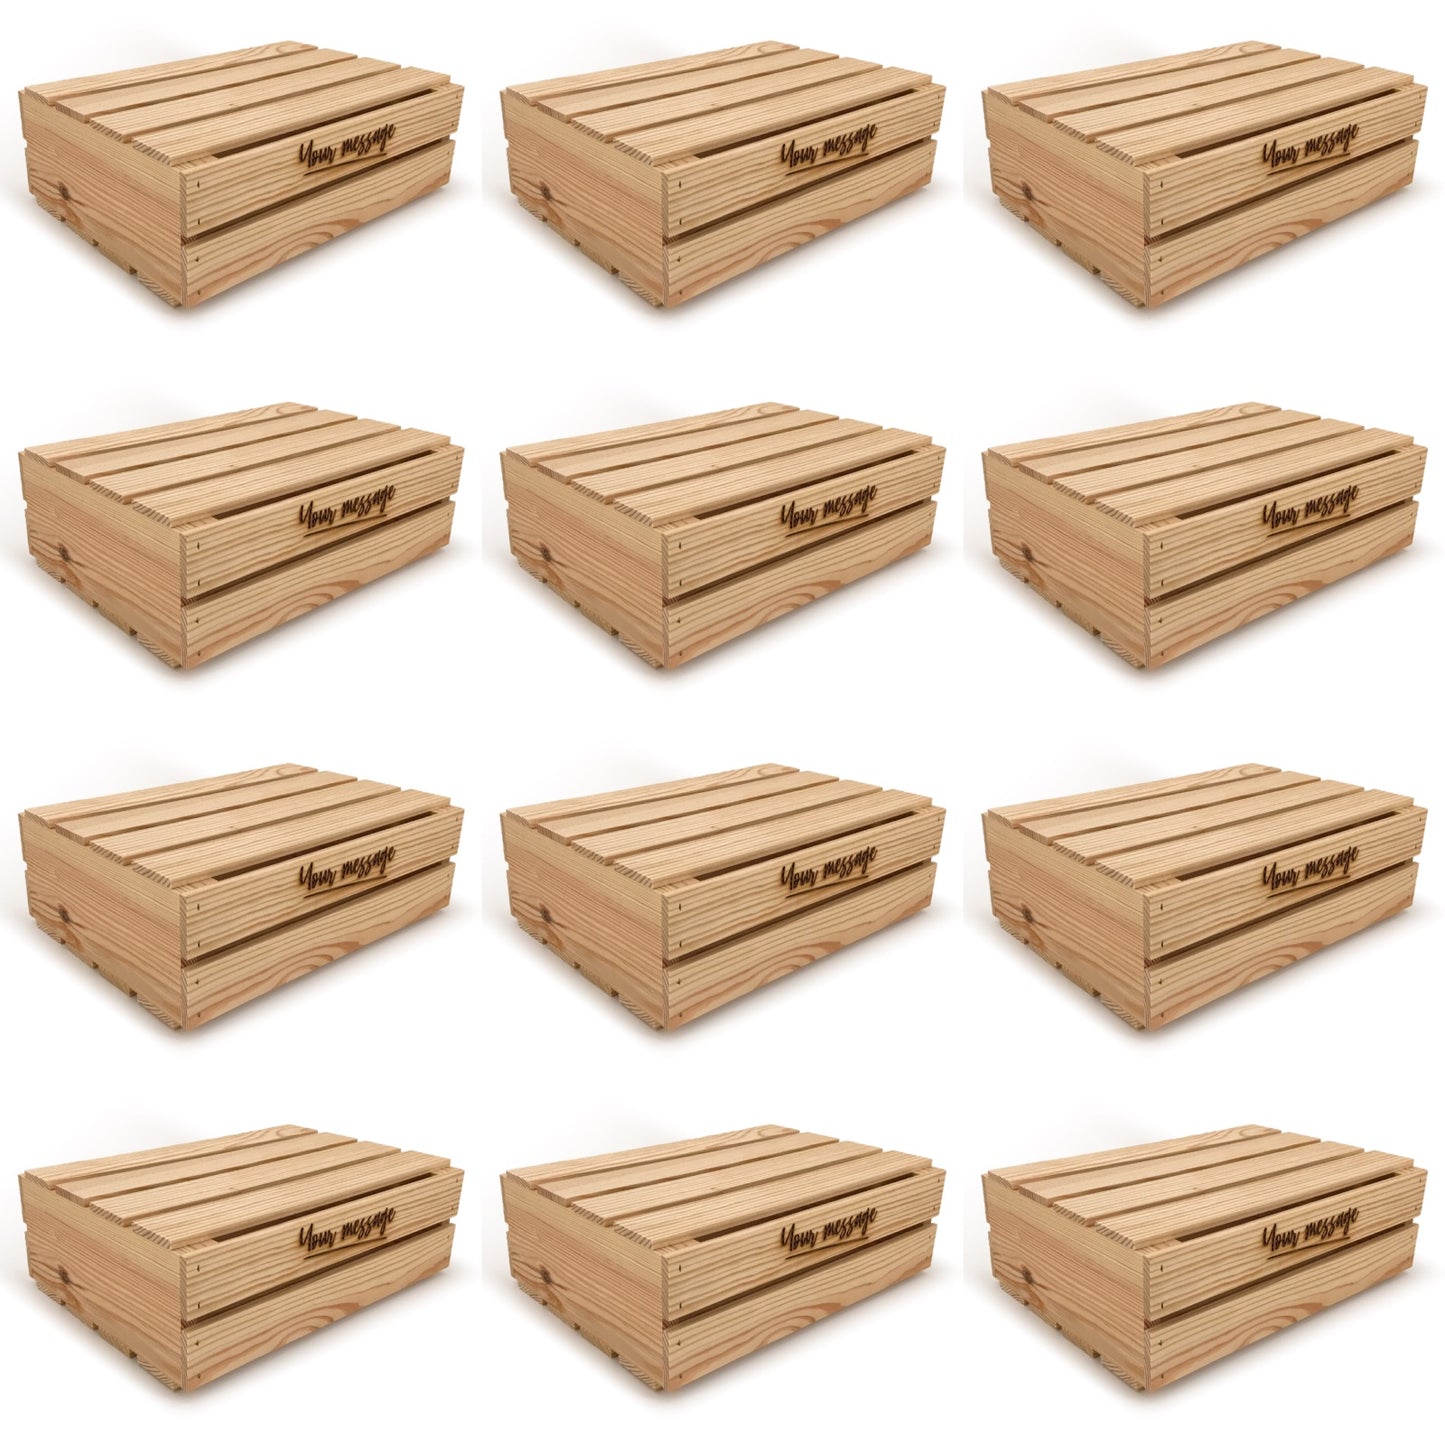 12 Small wooden crates with lid and custom message 16x12x5.25, 6-WS-16-12-5.25-ST-NW-LL, 12-WS-16-12-5.25-ST-NW-LL, 24-WS-16-12-5.25-ST-NW-LL, 48-WS-16-12-5.25-ST-NW-LL, 96-WS-16-12-5.25-ST-NW-LL